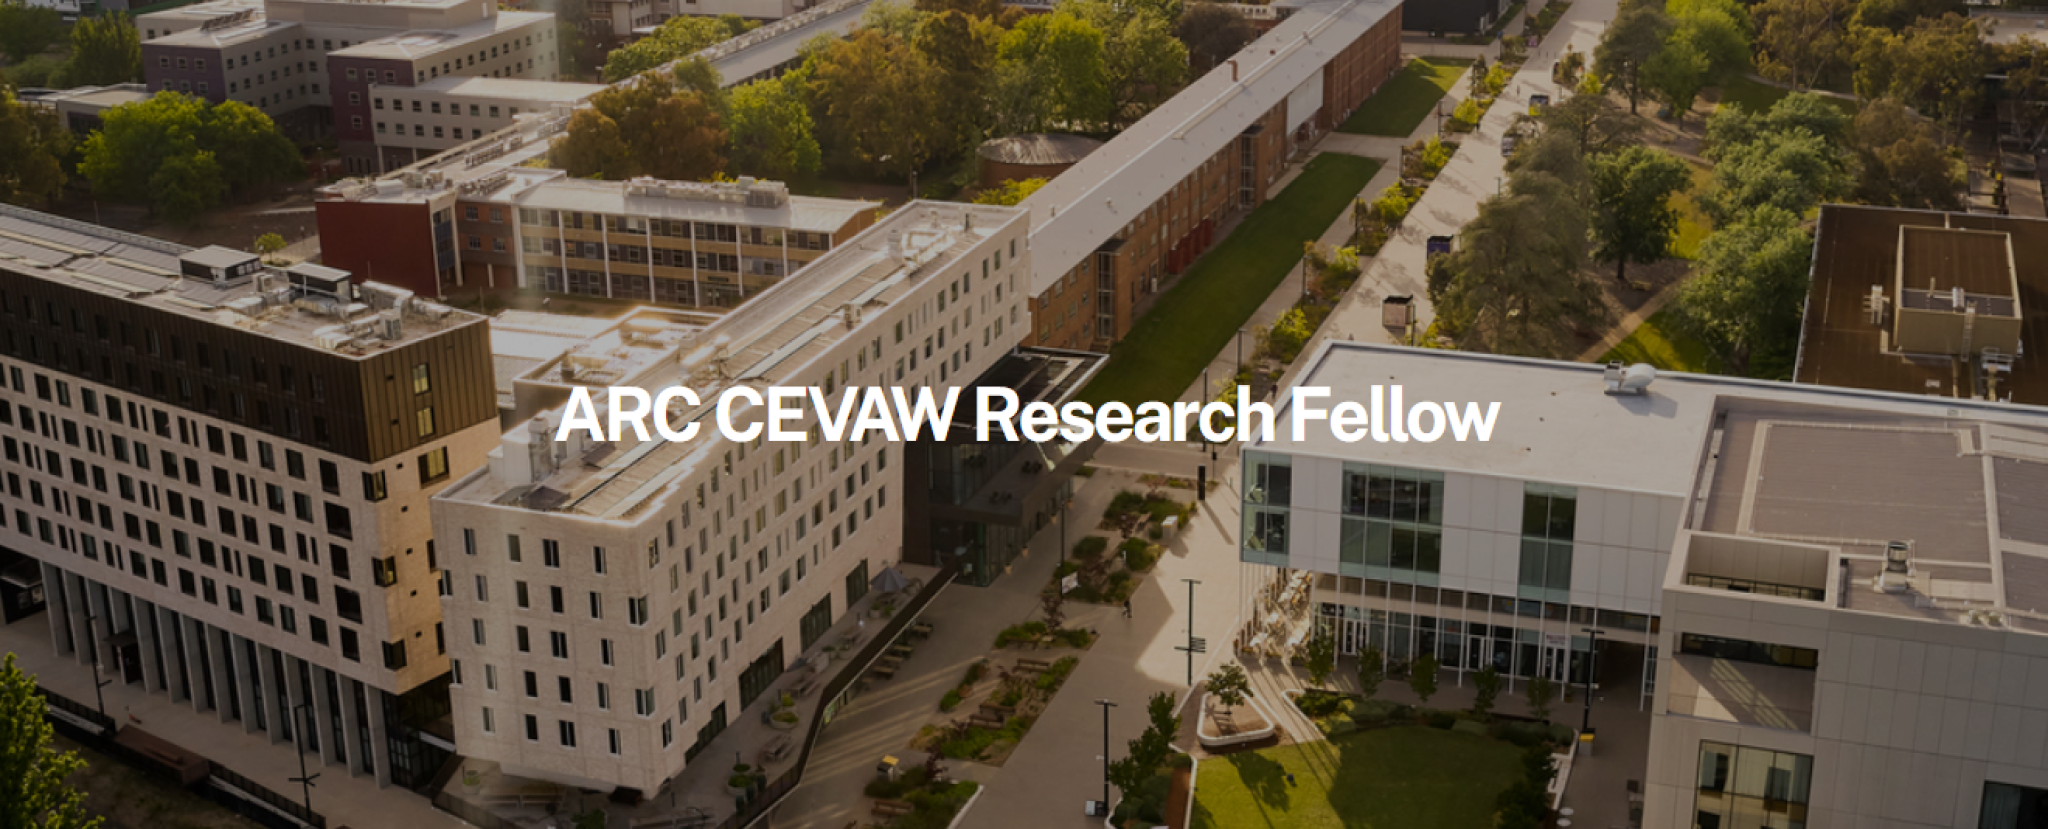 ARC CEVAW Research Fellow 